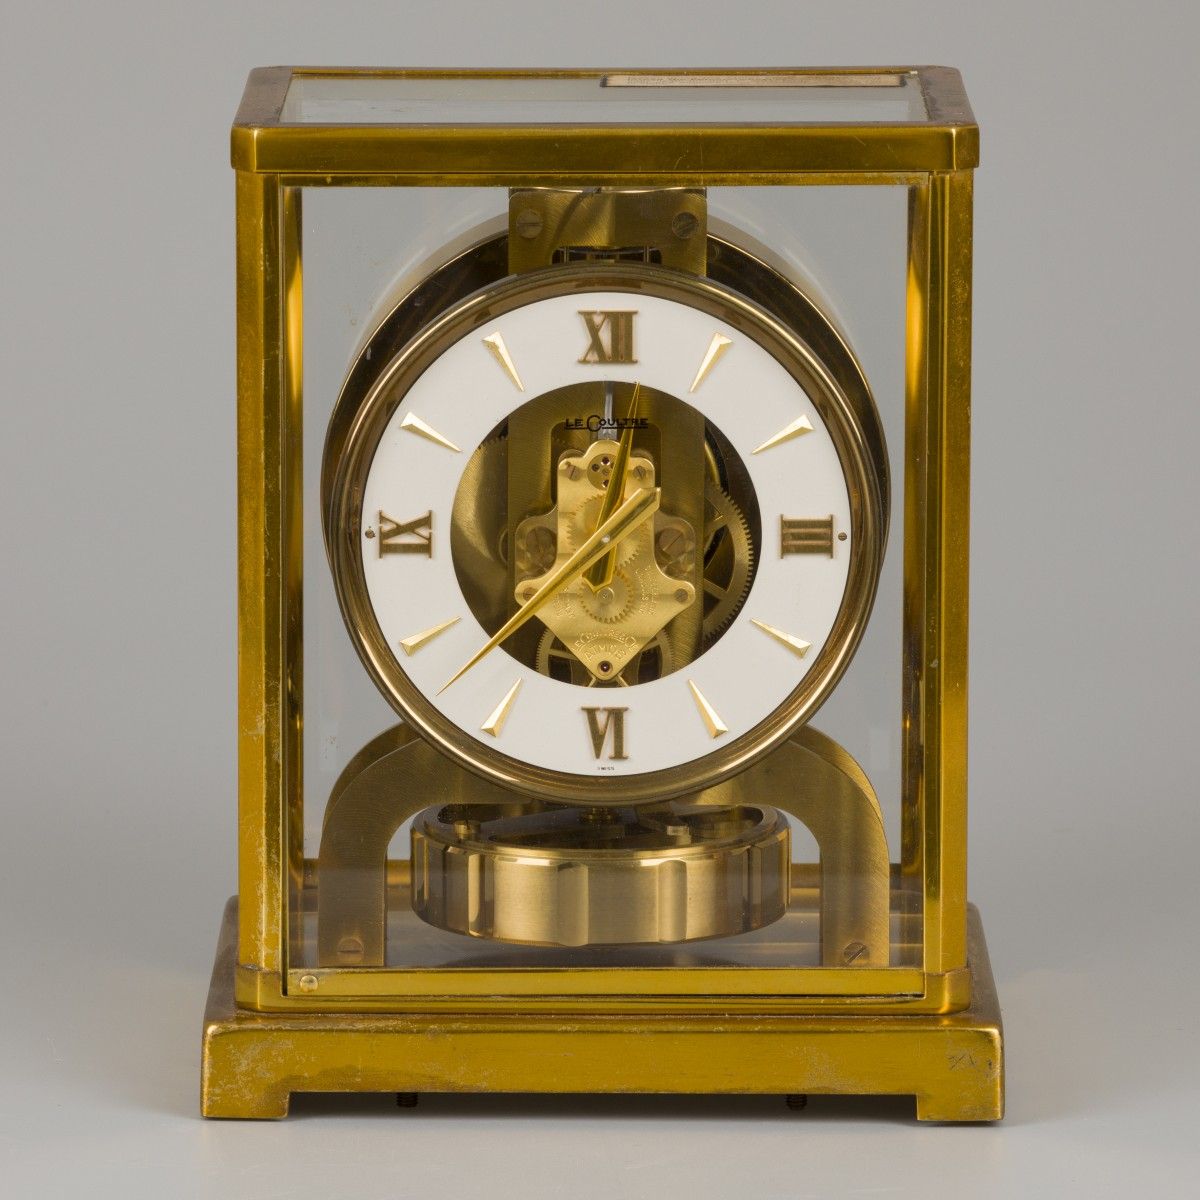 A Jaeger-LeCoultre Atmos table clock, Switzerland, 20th century. Funzione perpet&hellip;